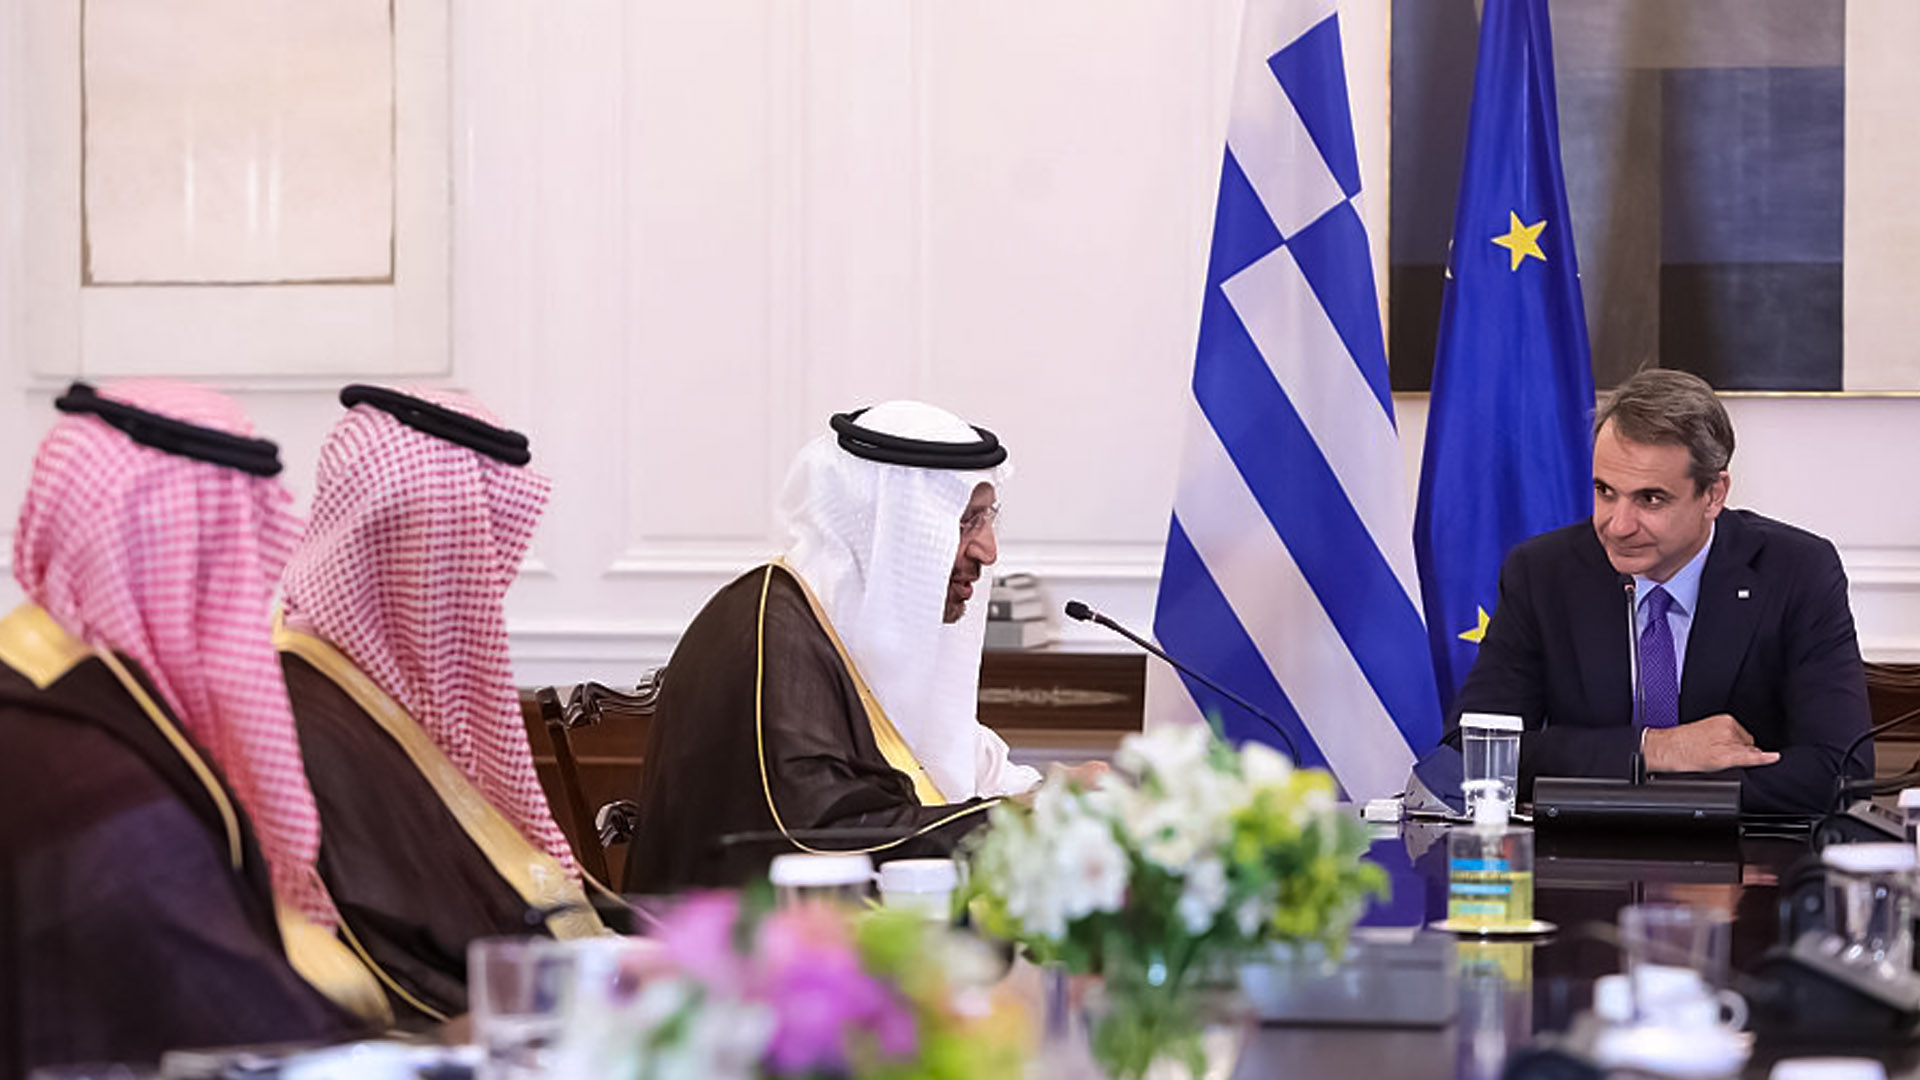 Prime Minister of Greece meets with Saudi investment minister